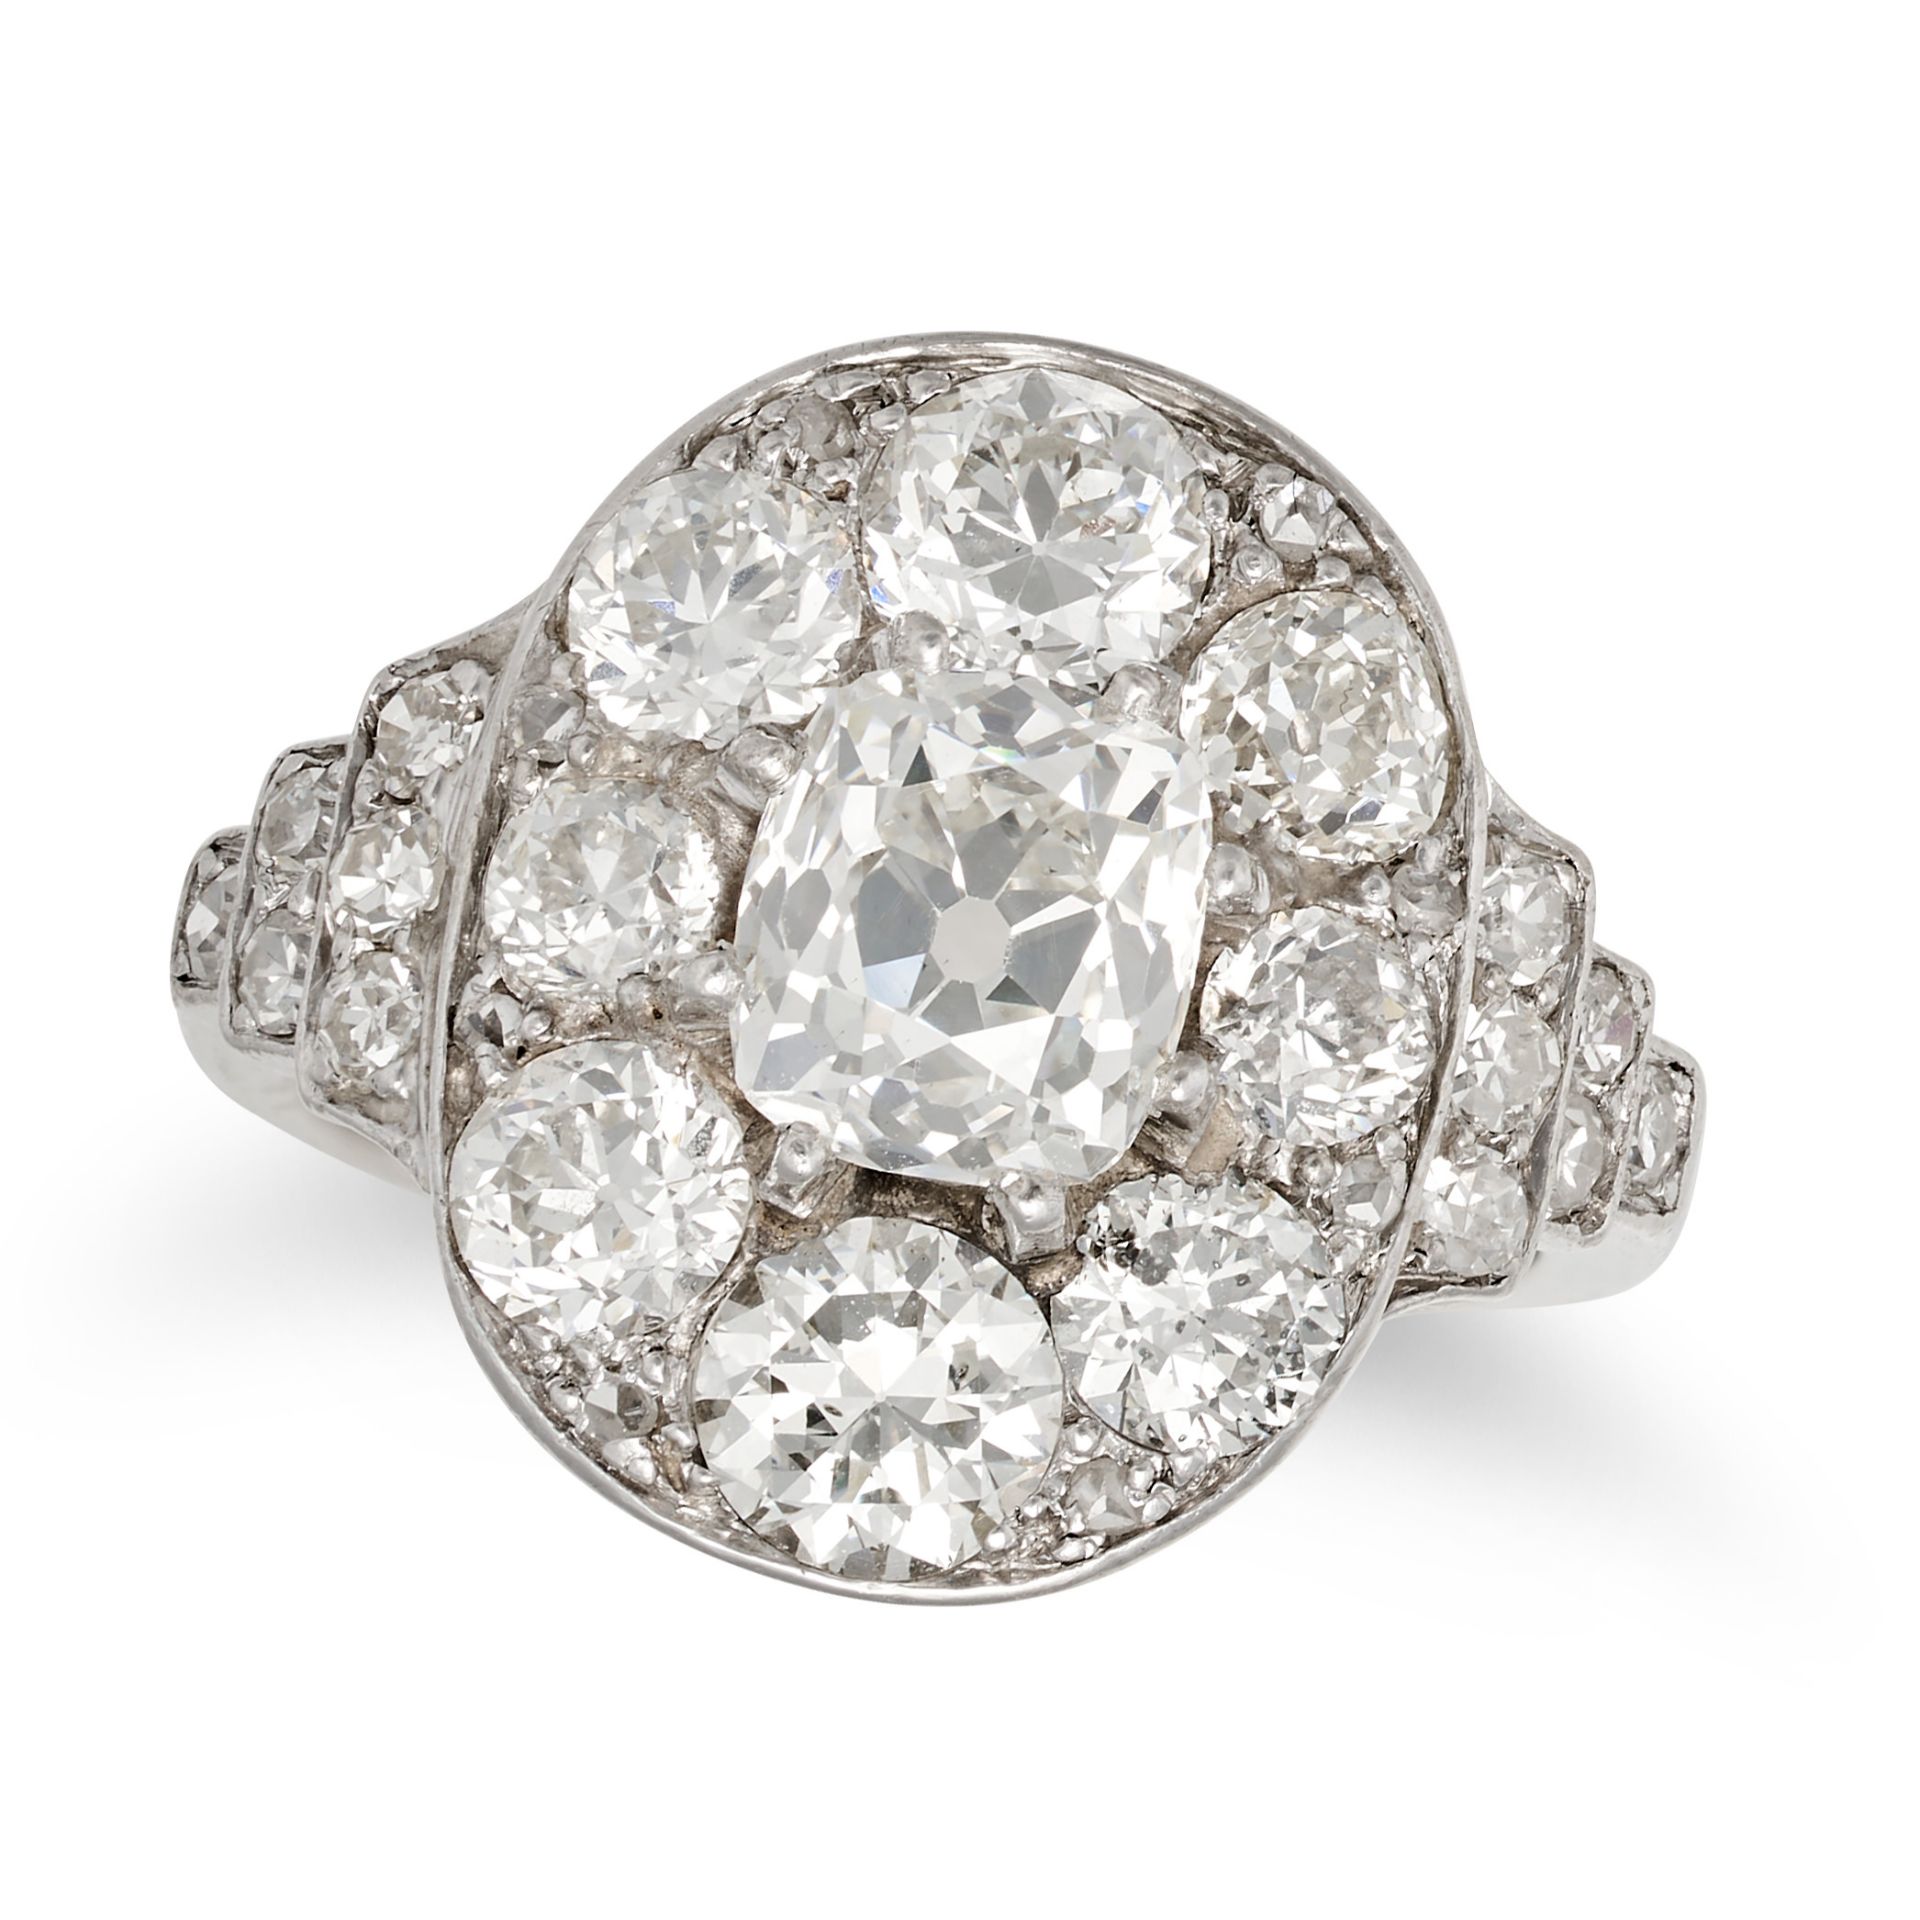 A FINE OLD CUT DIAMOND CLUSTER RING in platinum, set with an old cut diamond of approximately 1.1... - Image 2 of 2